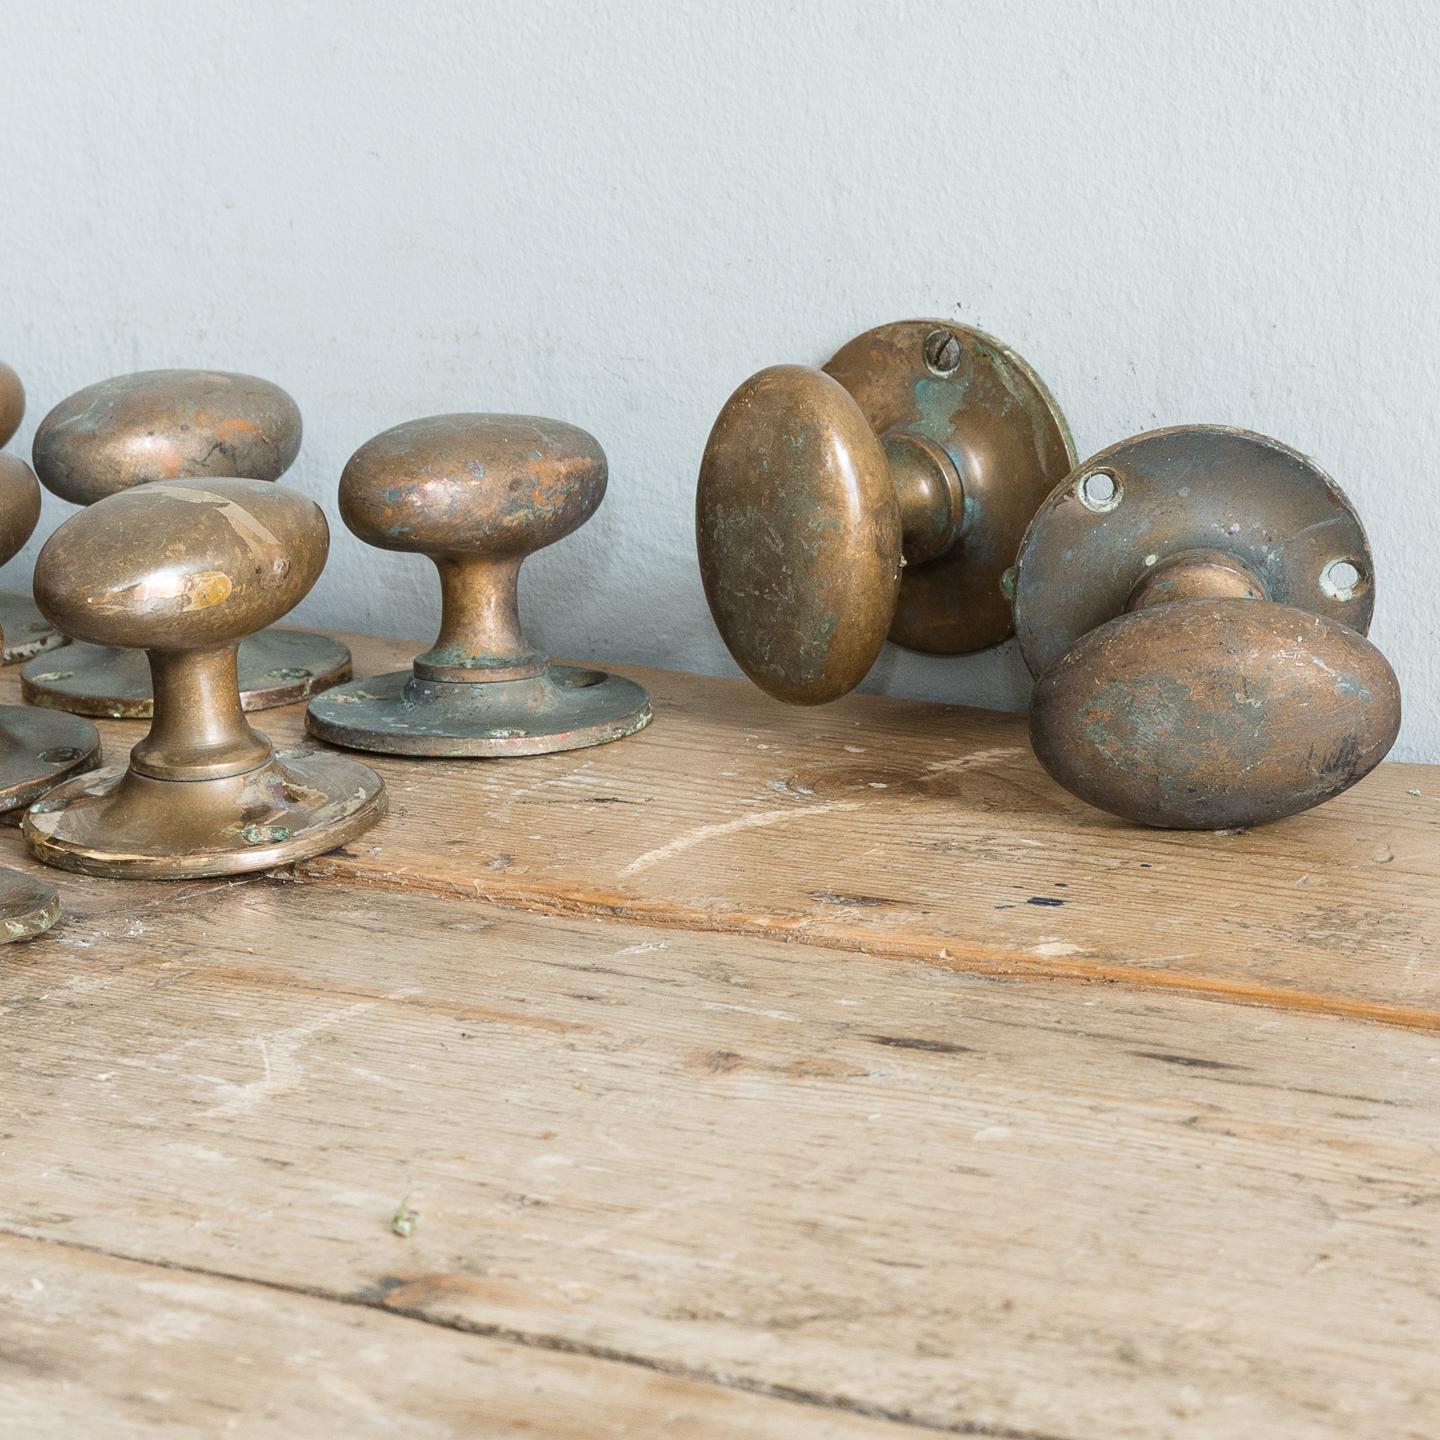 Antique patinated brass door handles, removed from Inverness Catering College, circa 1910-1920, the oval handles on circular backplates, with original unpolished patina.